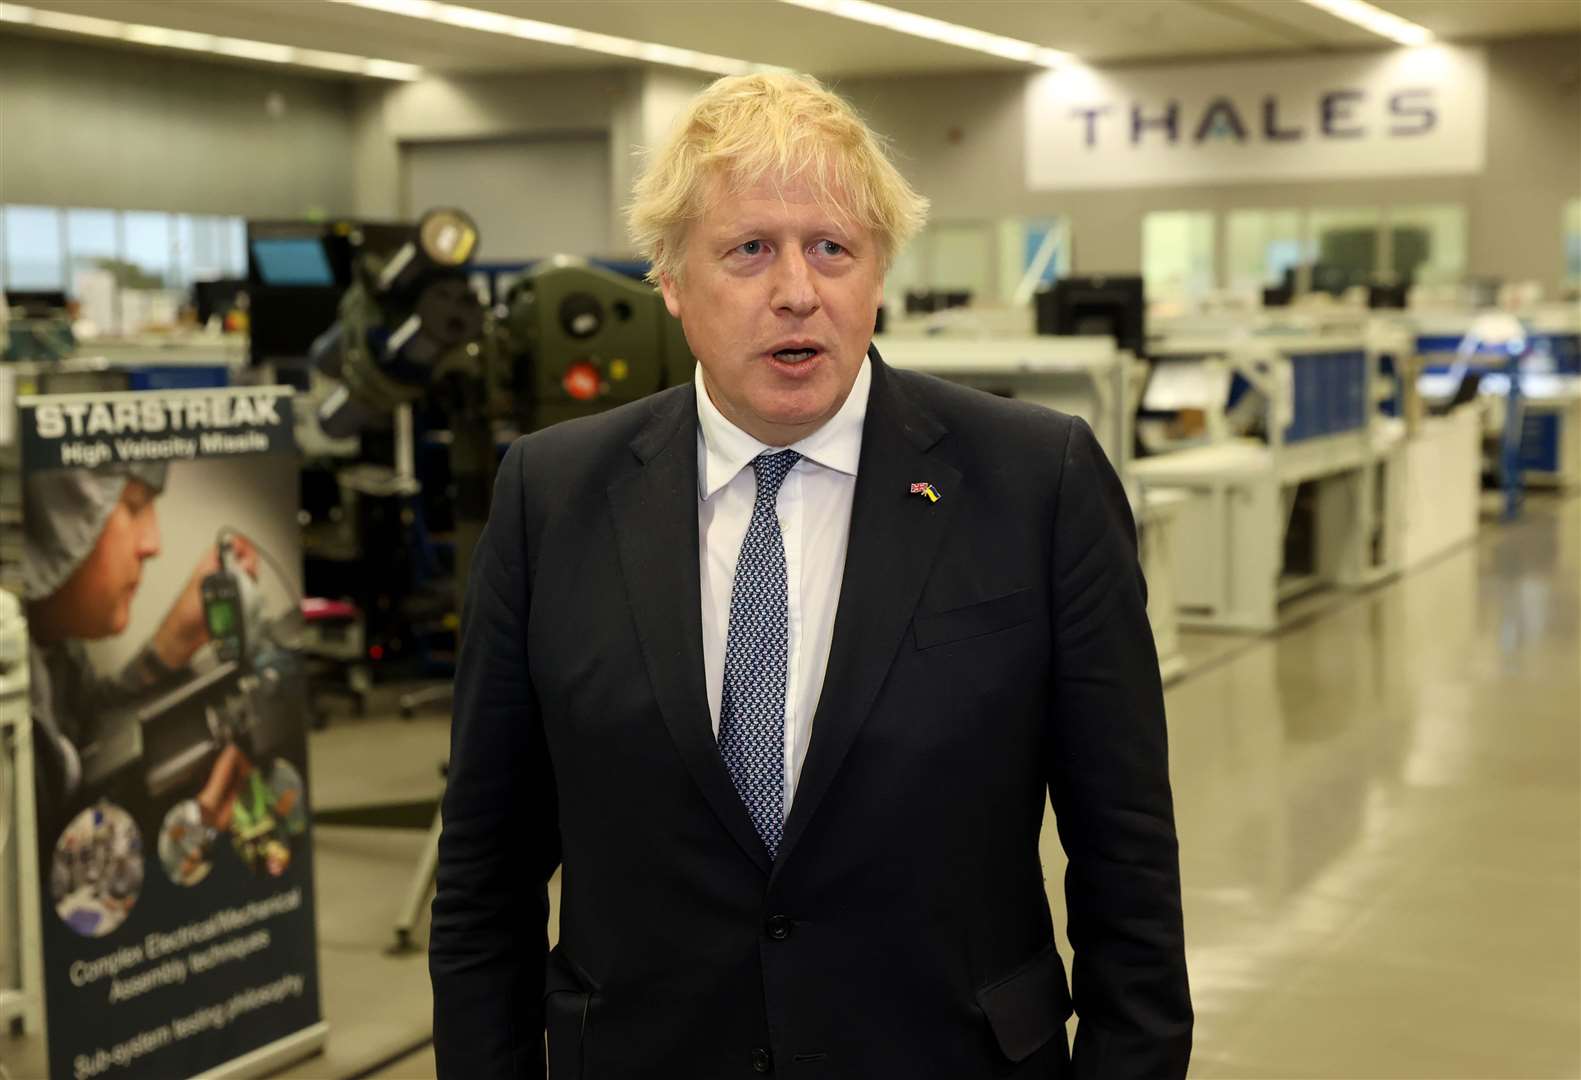 Prime Minister Boris Johnson at the Thales weapons plant in Belfast (Liam McBurney/PA)